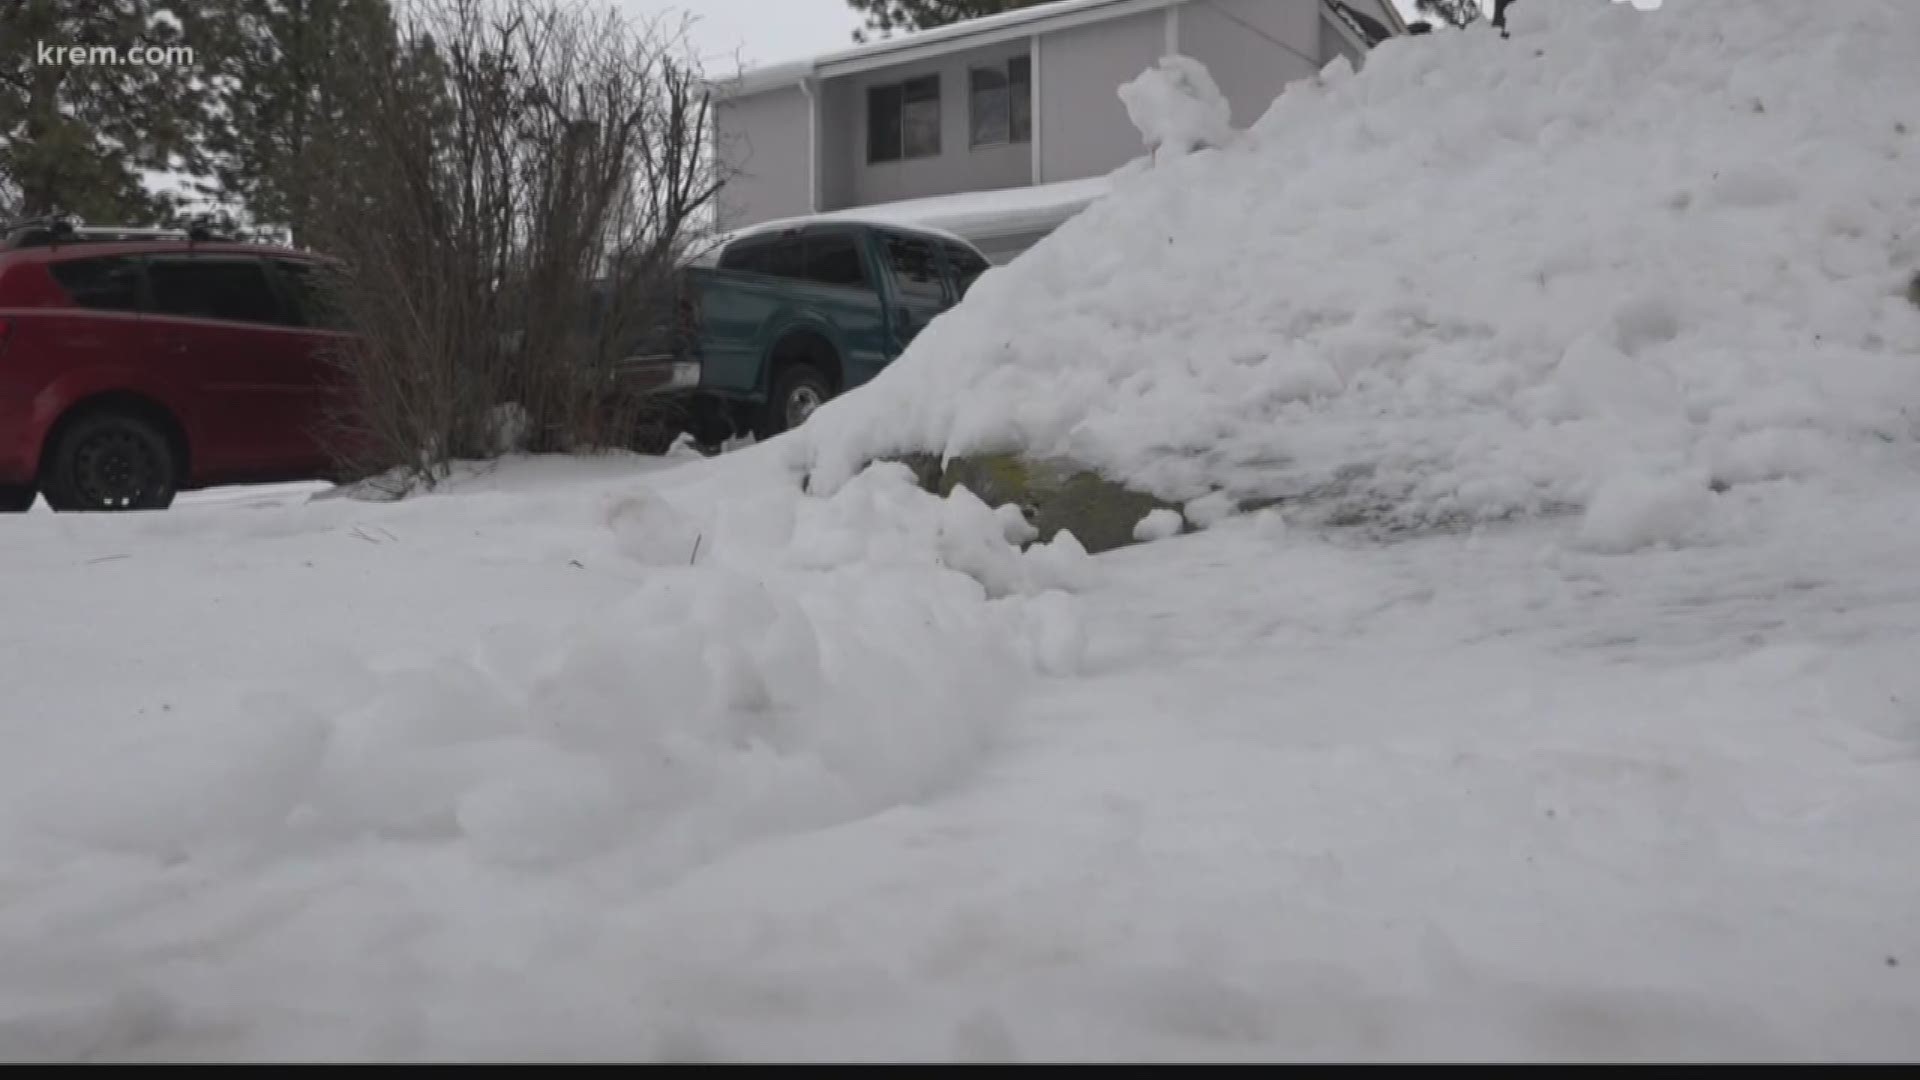 Two people in Spokane aren't seeing their street plowed because it lies between city and county plow routes. They are hoping to see home help before the next storm.